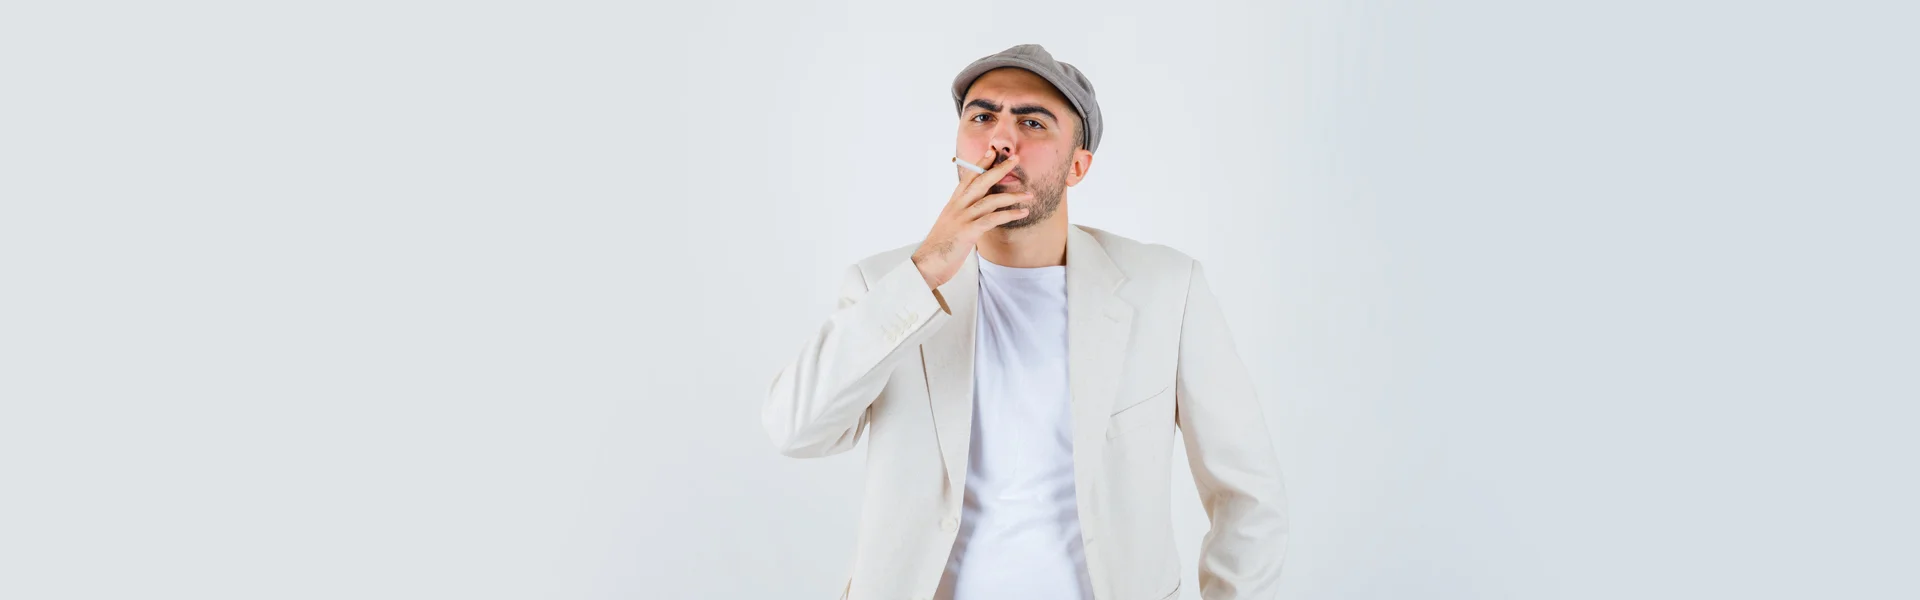 Effects of Smoking and Vaping on oral health